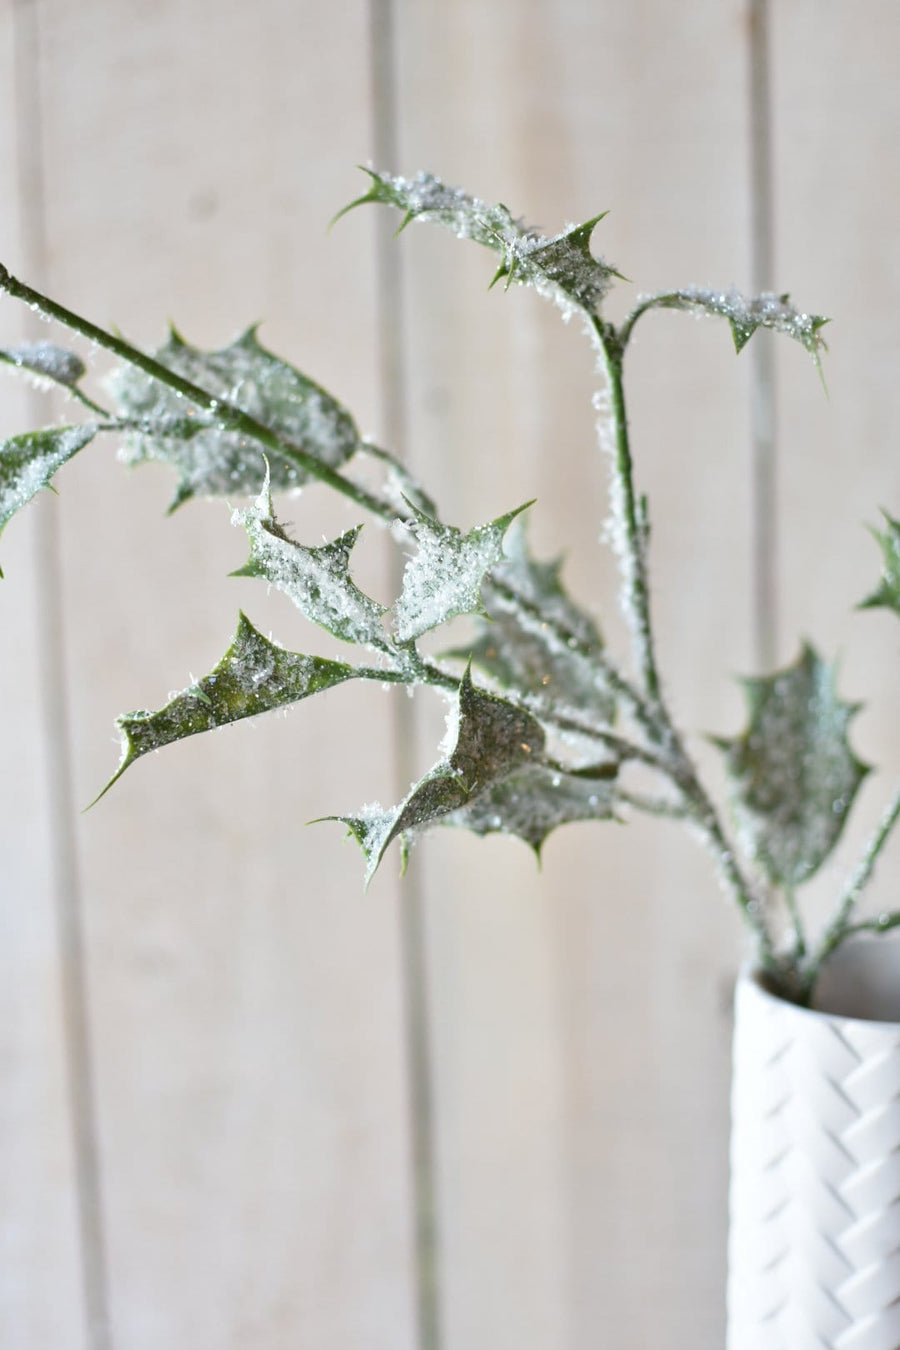 30" Faux Winter Holly Stem